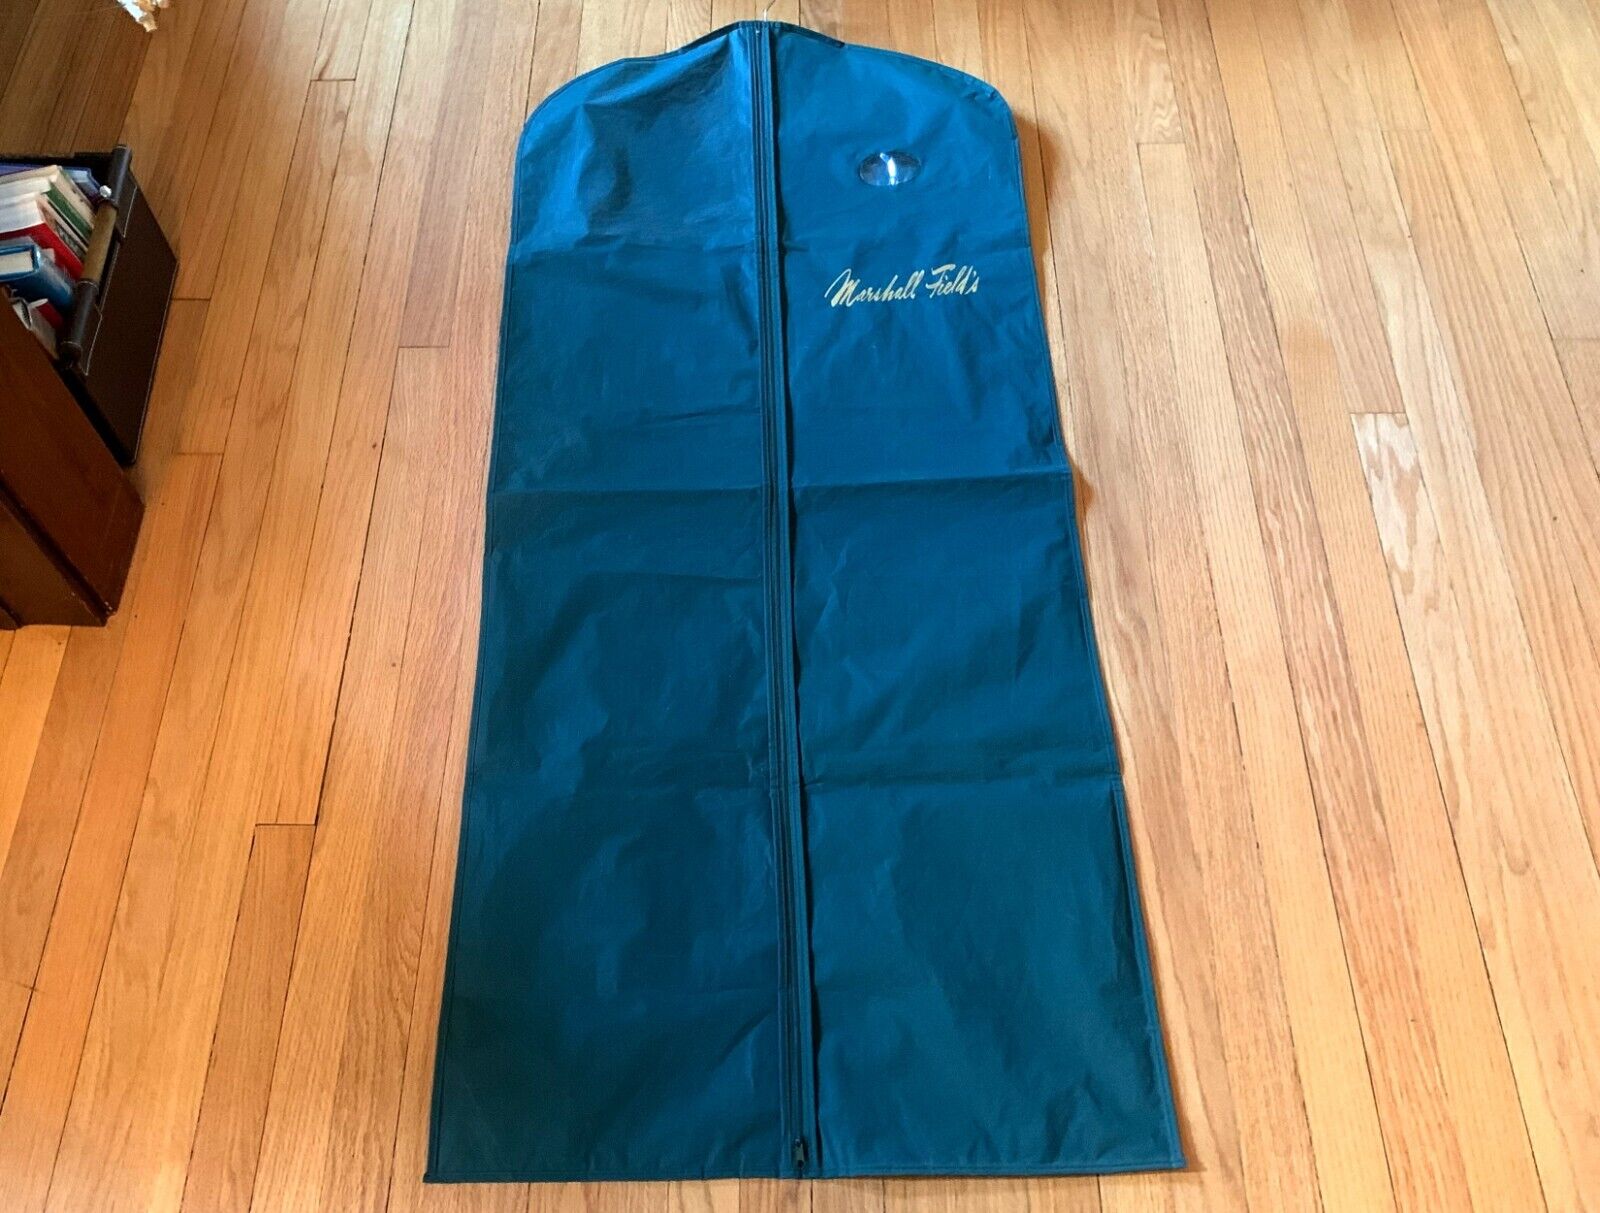 Vintage Marshall Field\'s Garment Bag with Matching Wooden Hanger 54\